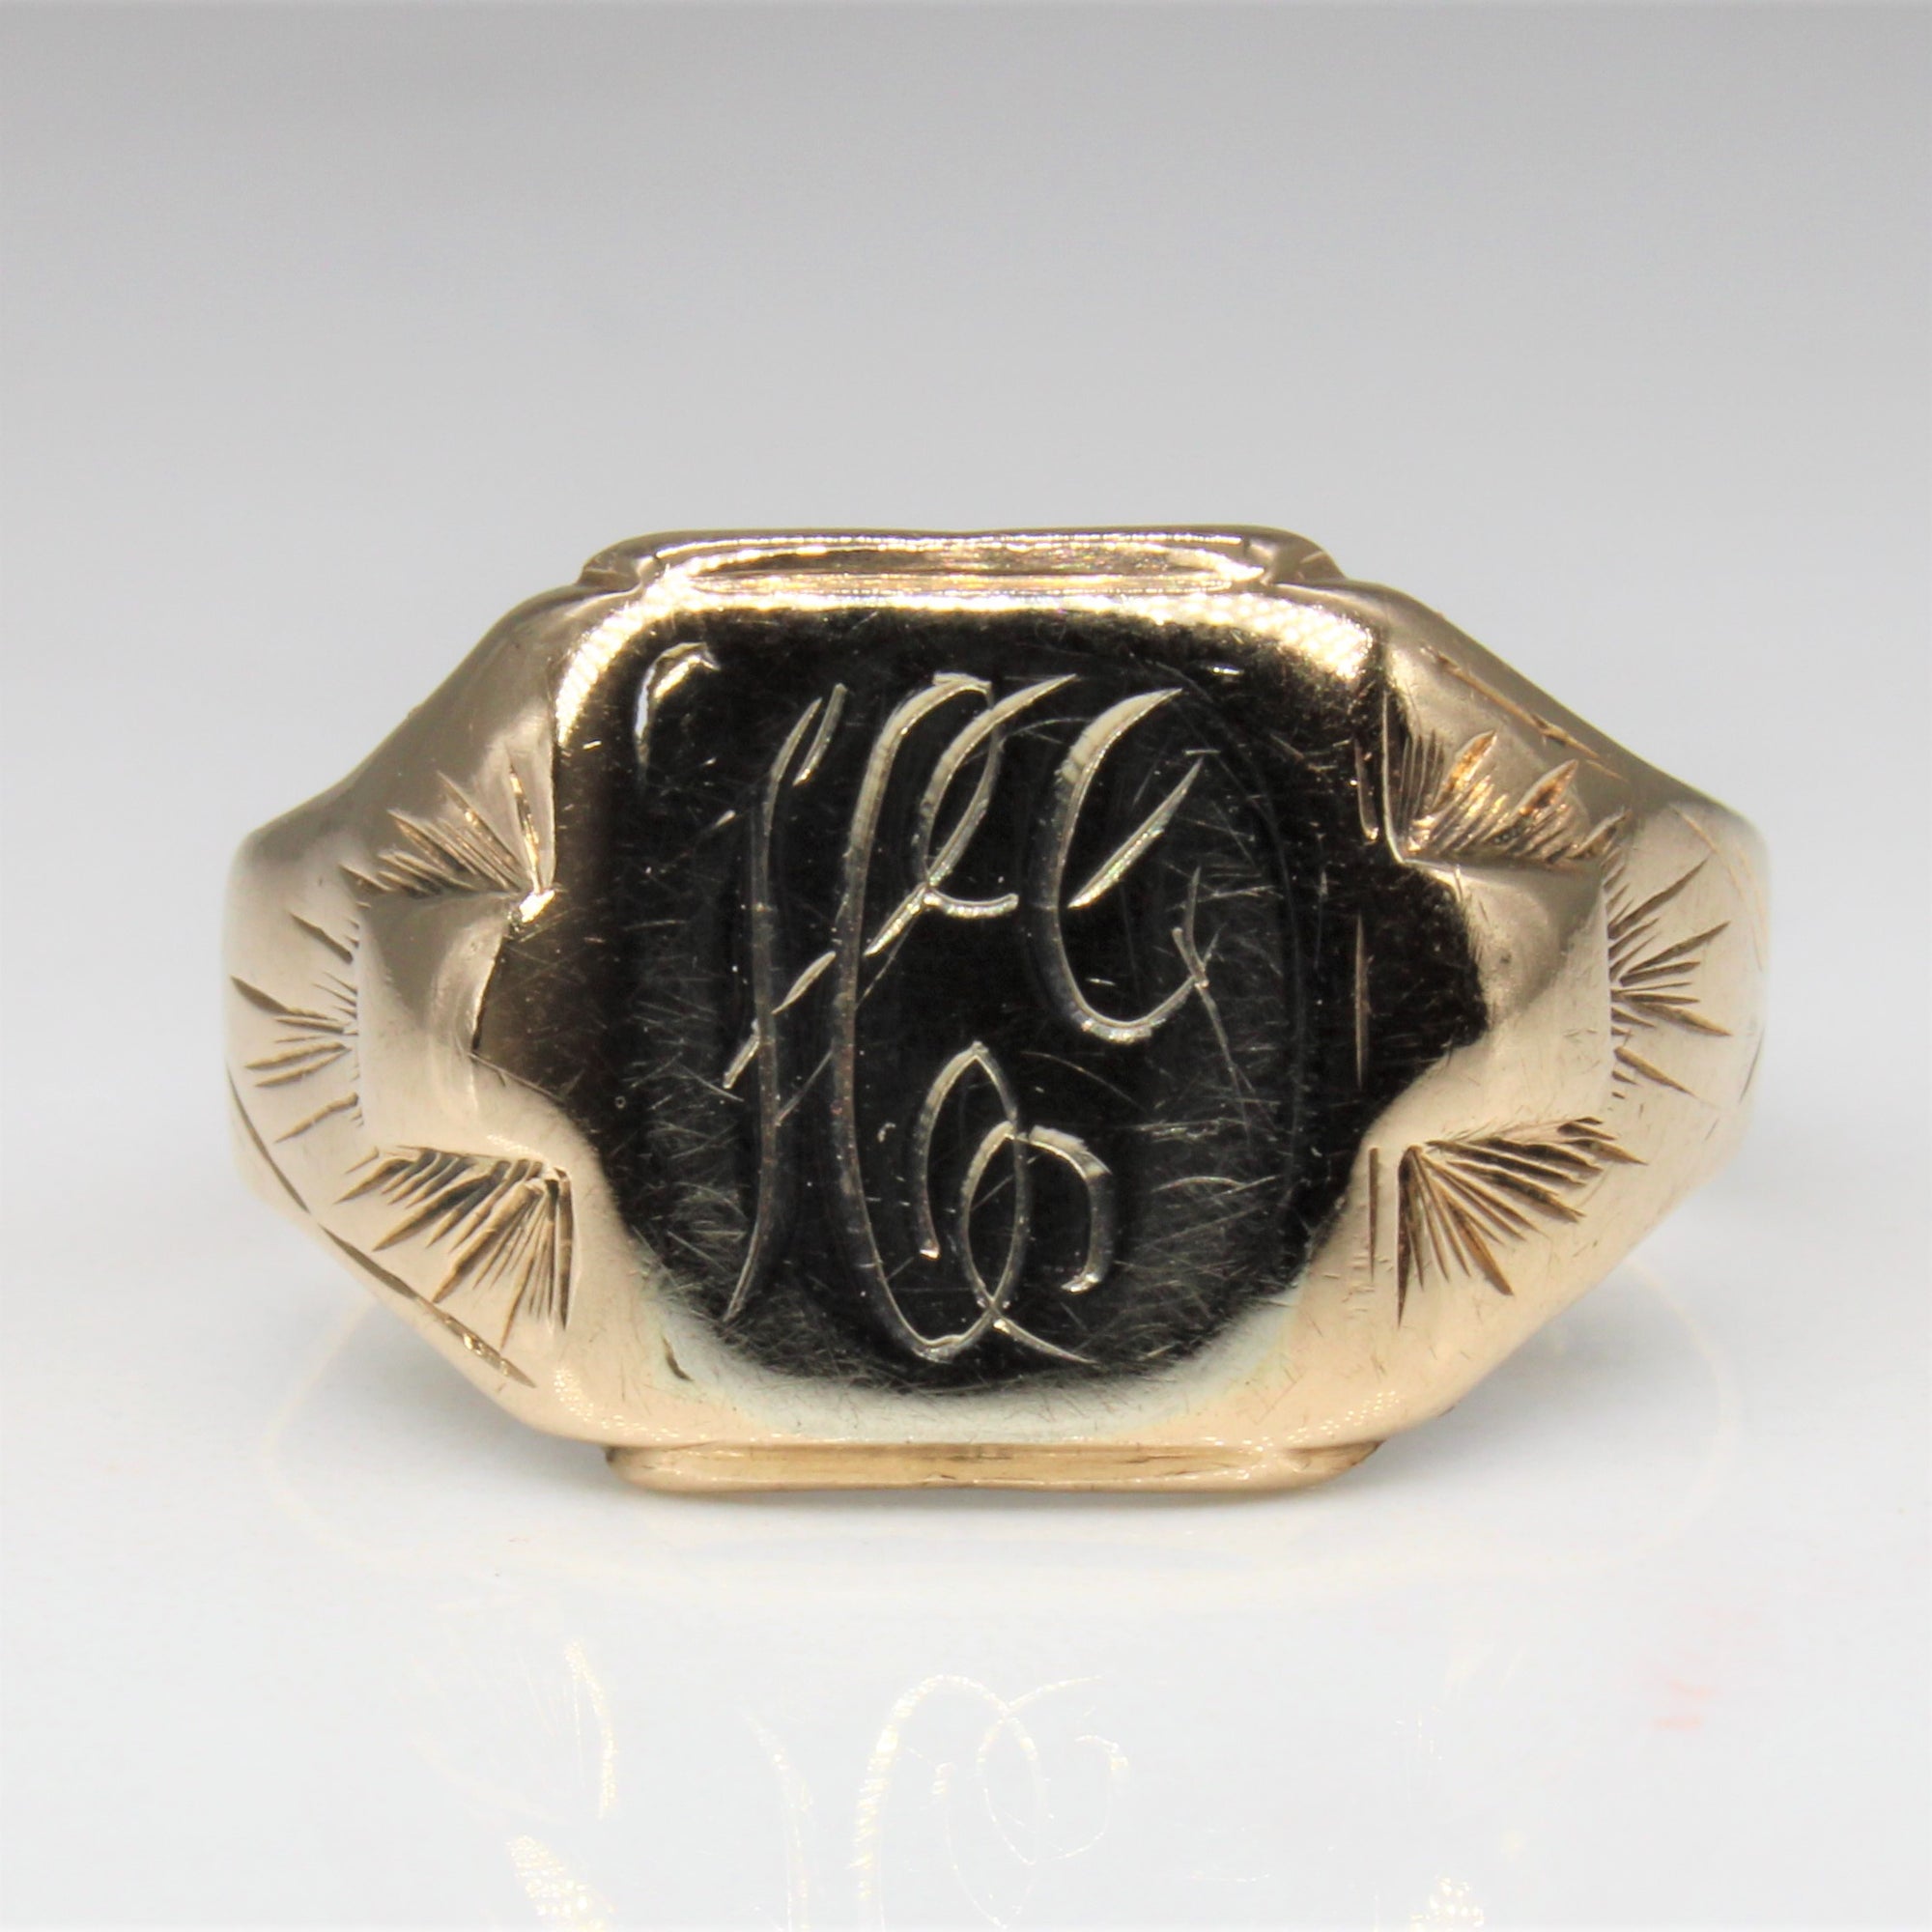 Engraved Initials 'HG' Signet ring | SZ 8.25 |